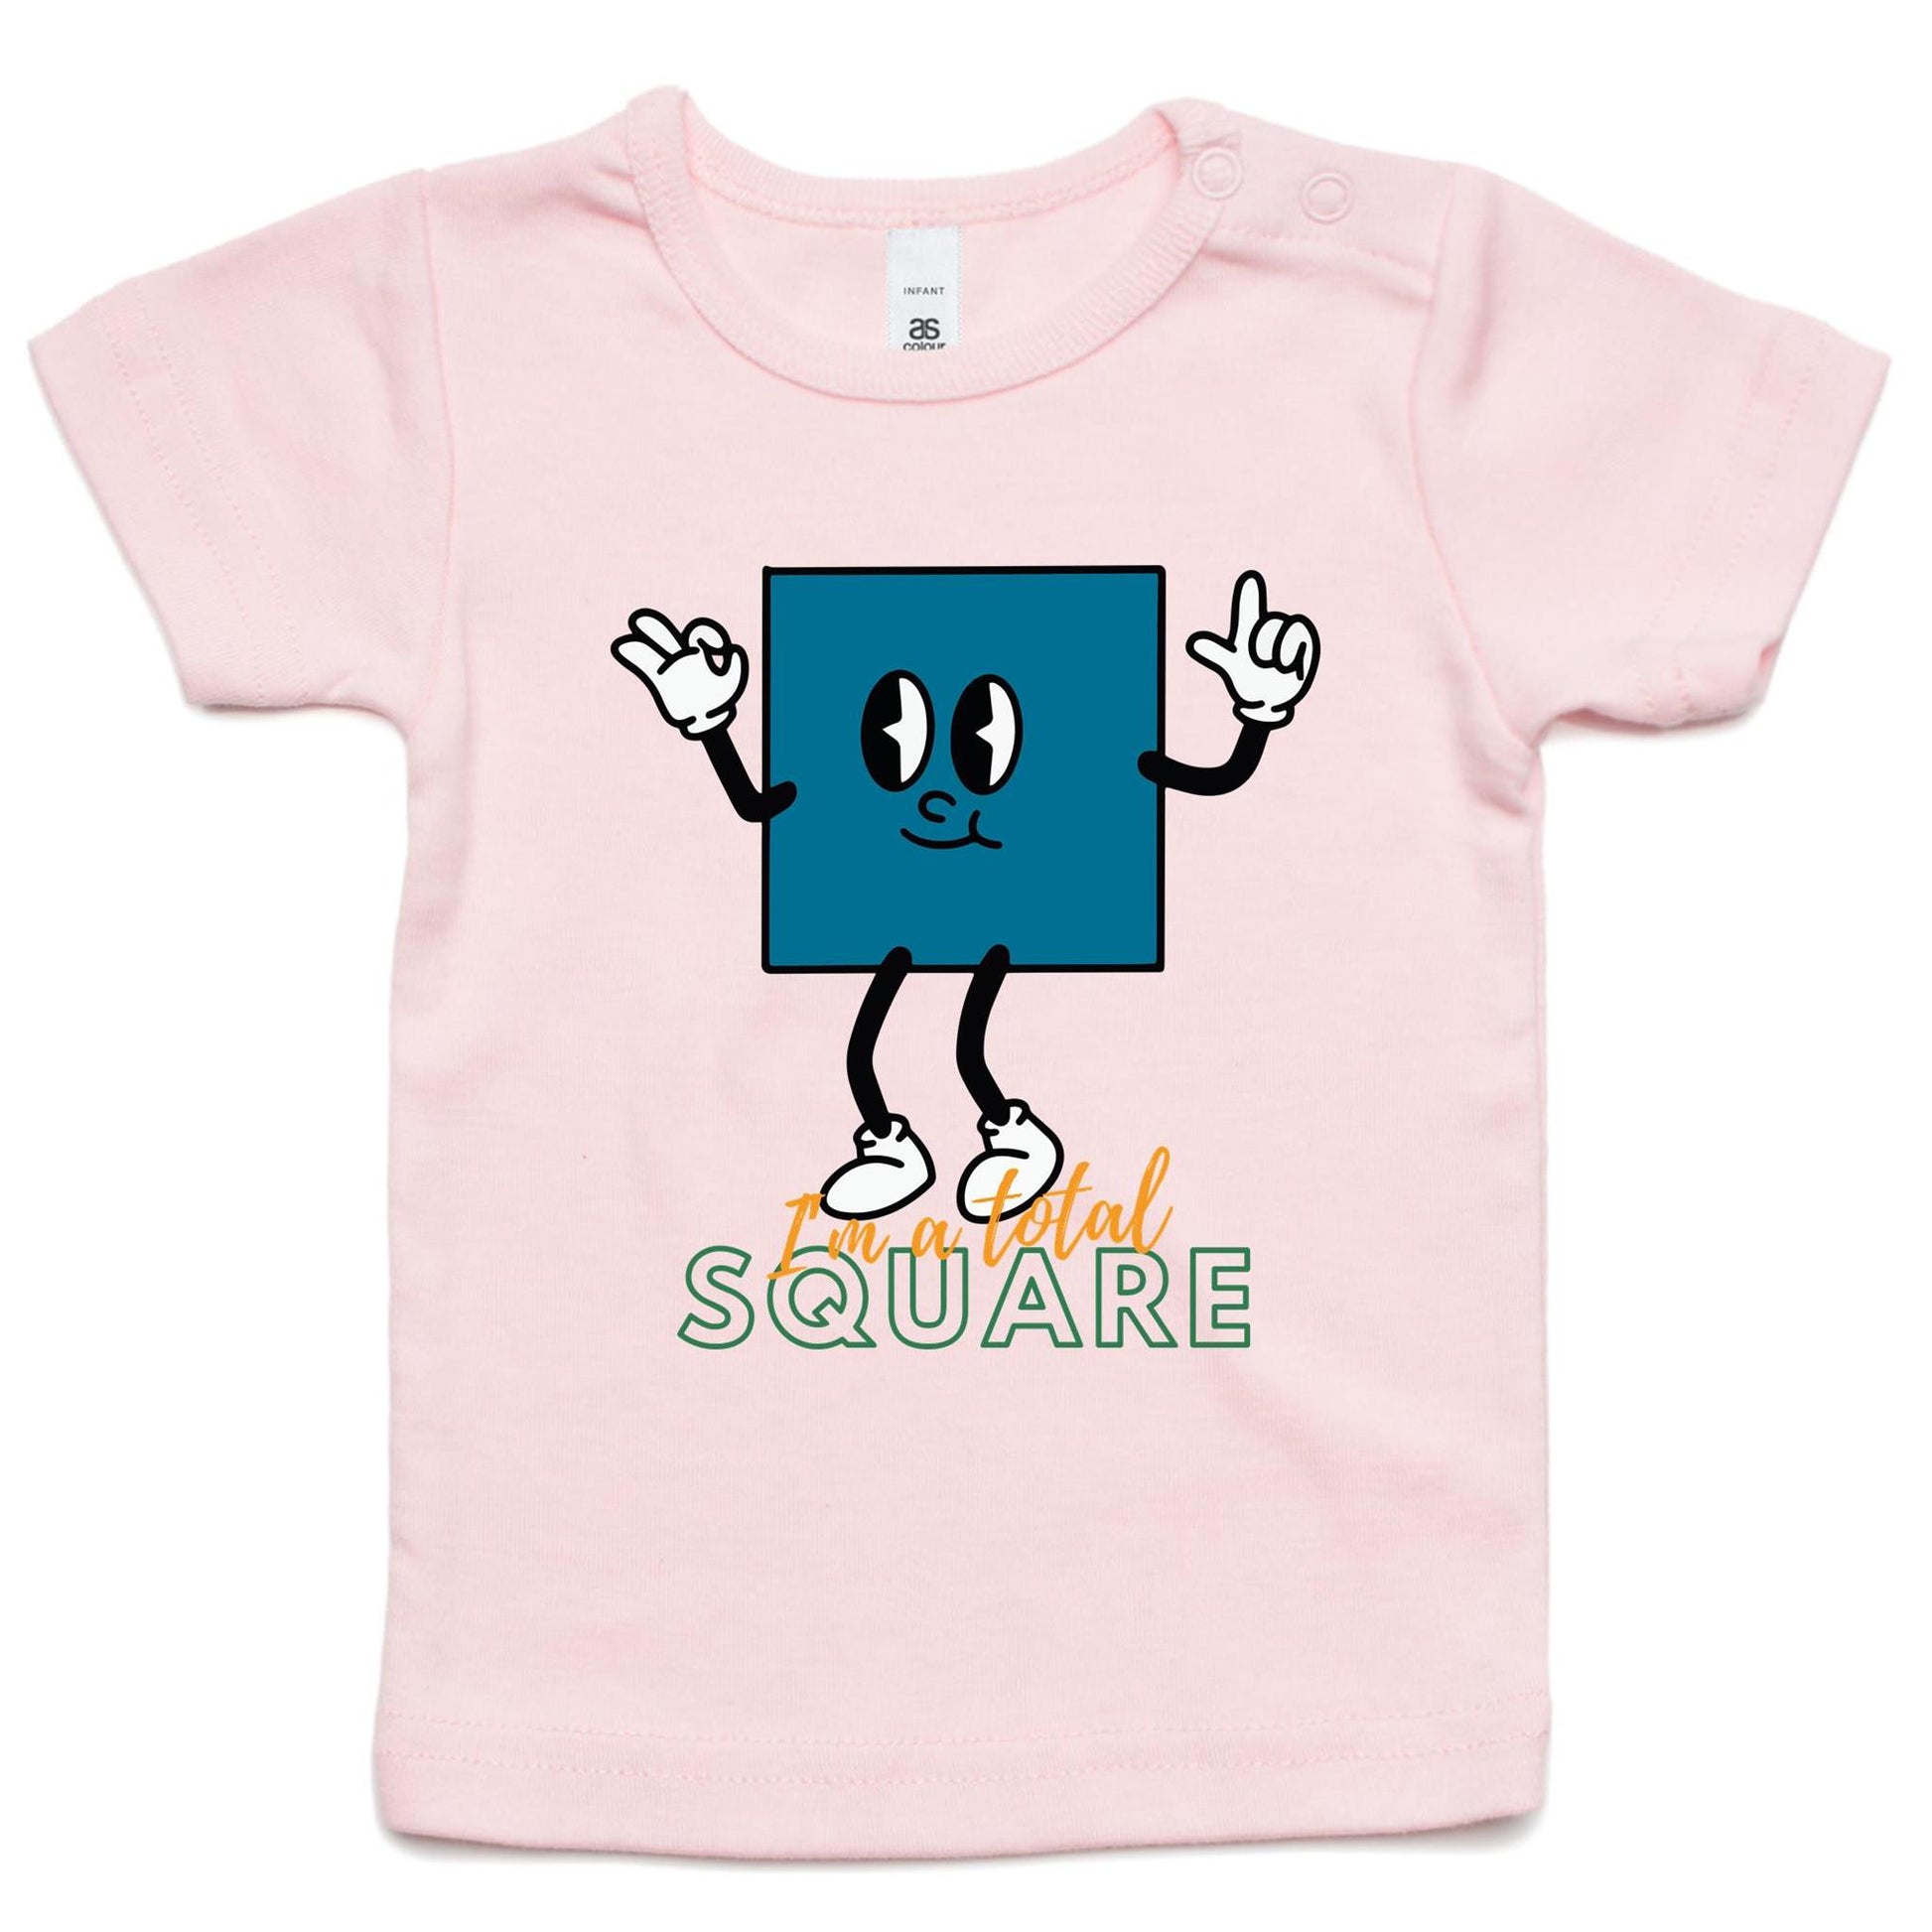 I'm A Total Square - Baby T-shirt Pink Baby T-shirt Funny Science